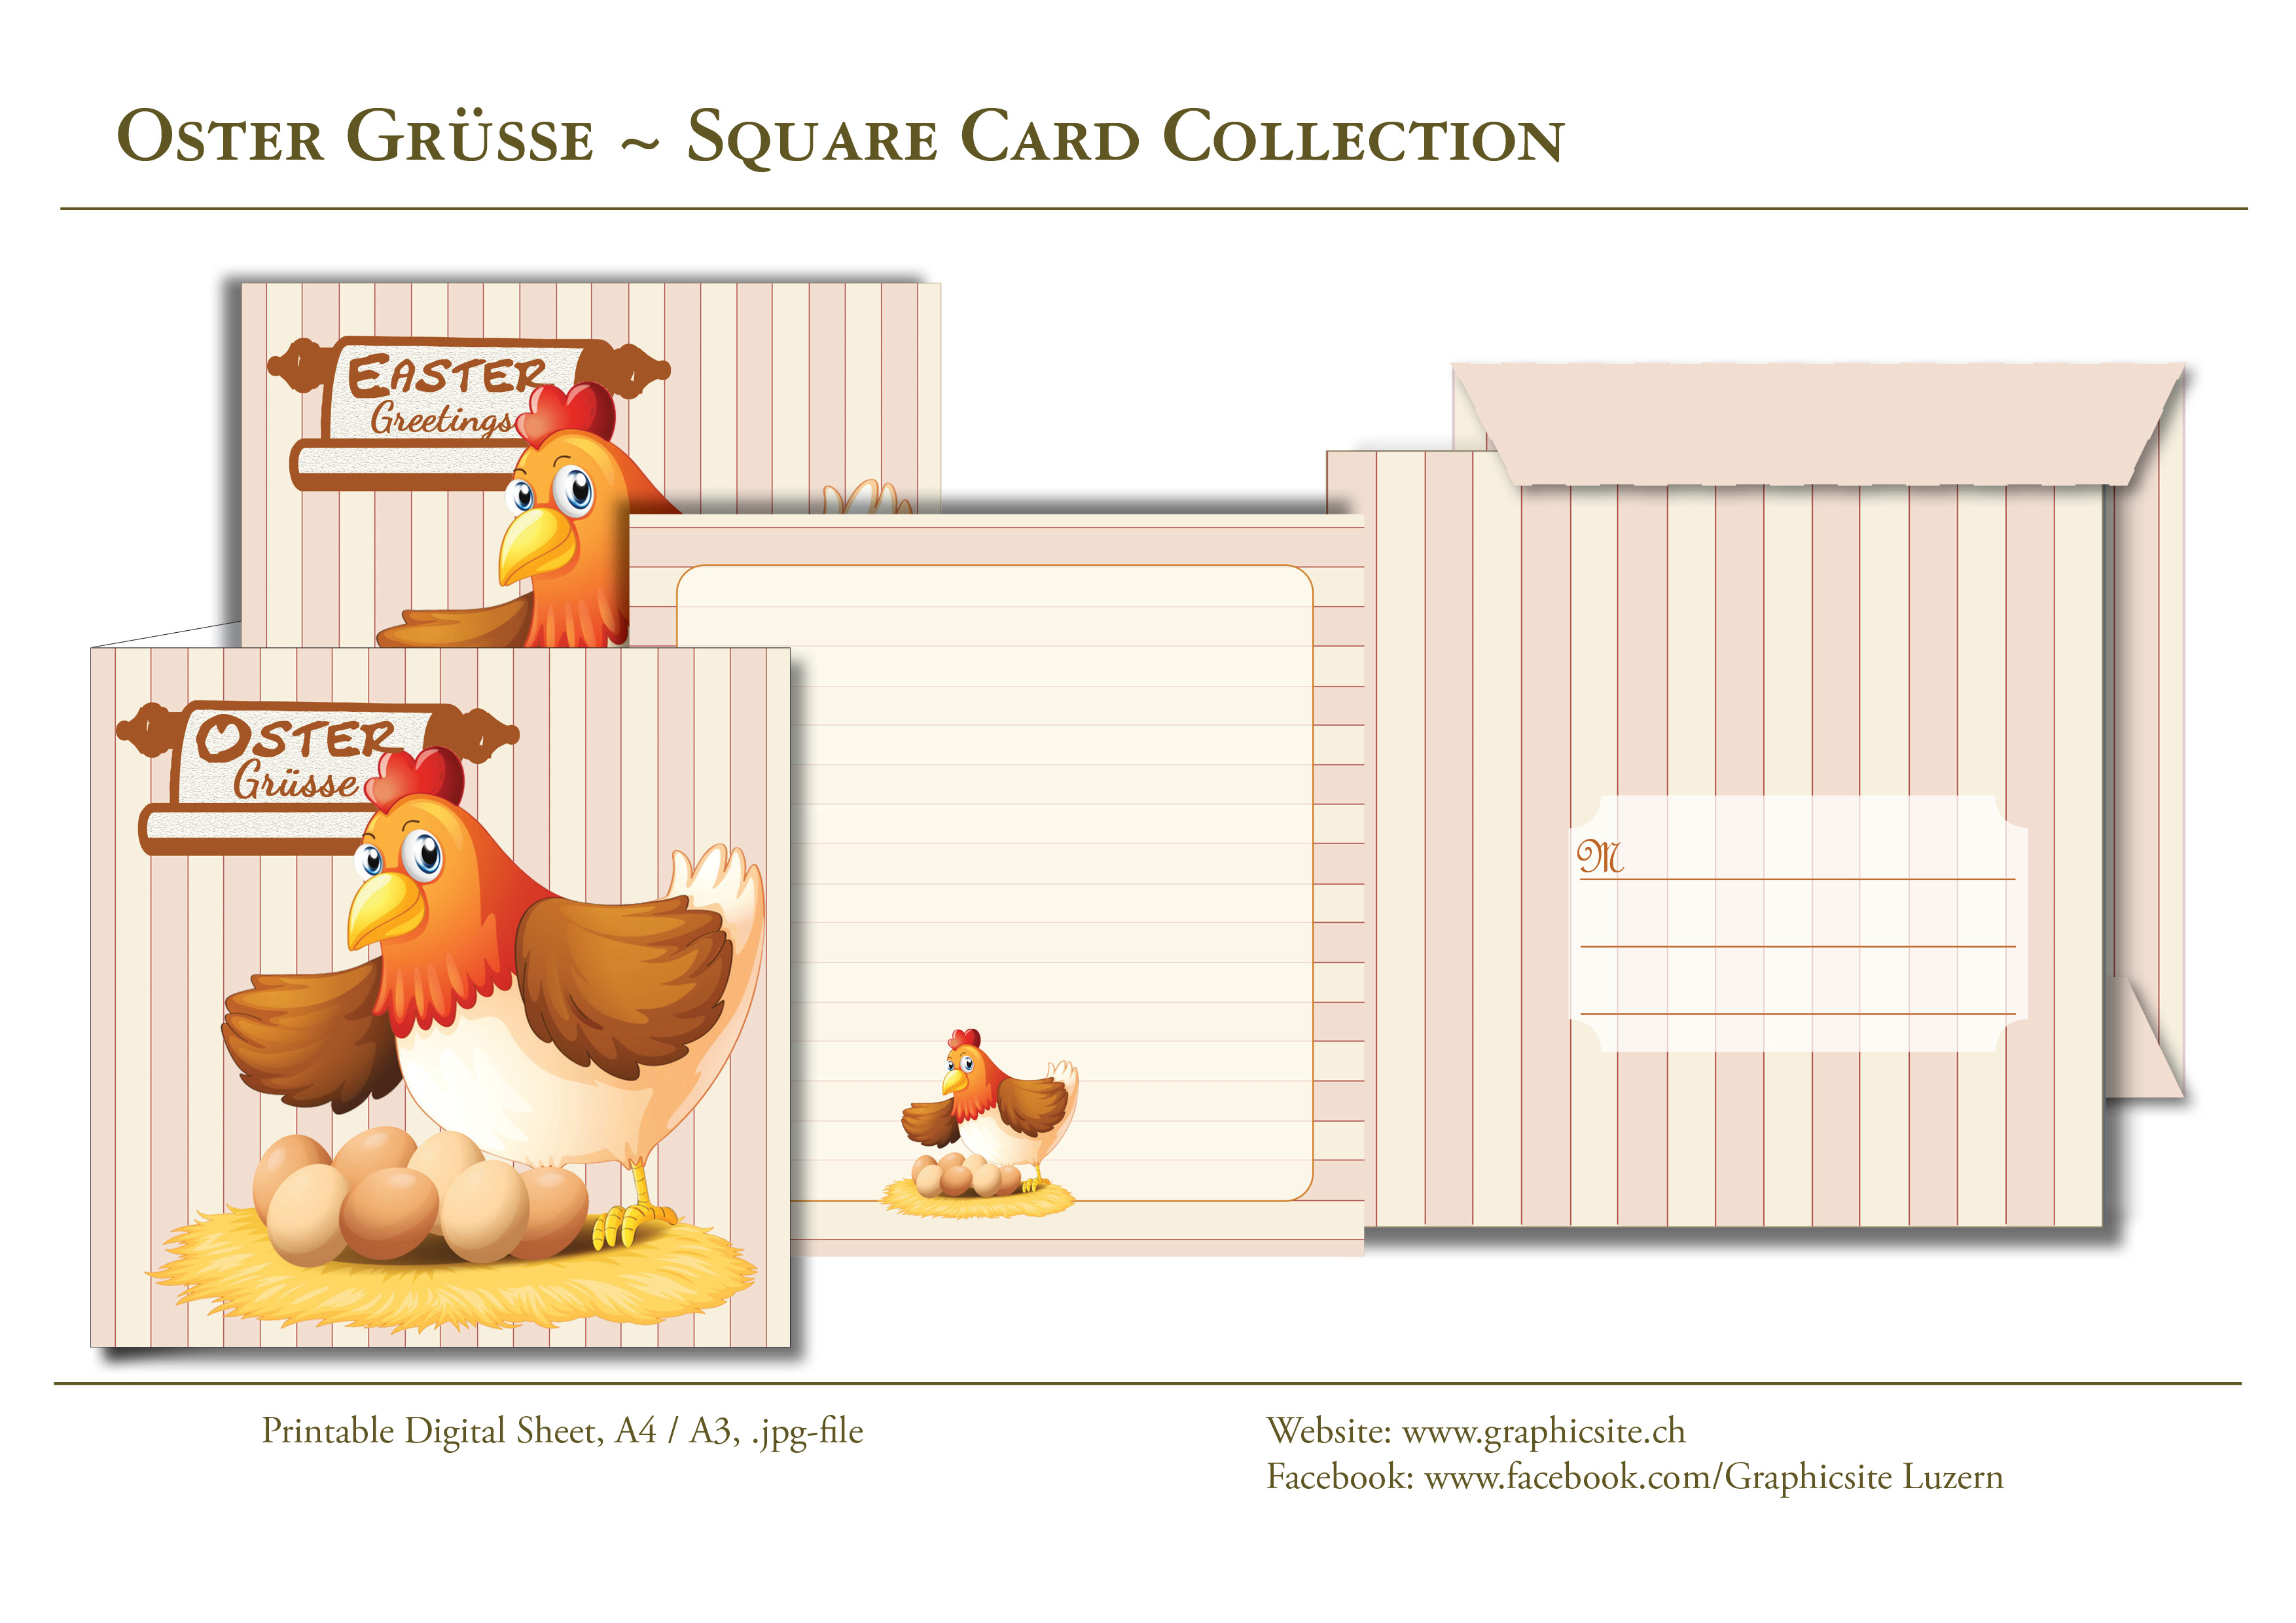 Printable Digital Sheets - Square Card Collection - Easter, Hen, Chicken, Eggs,